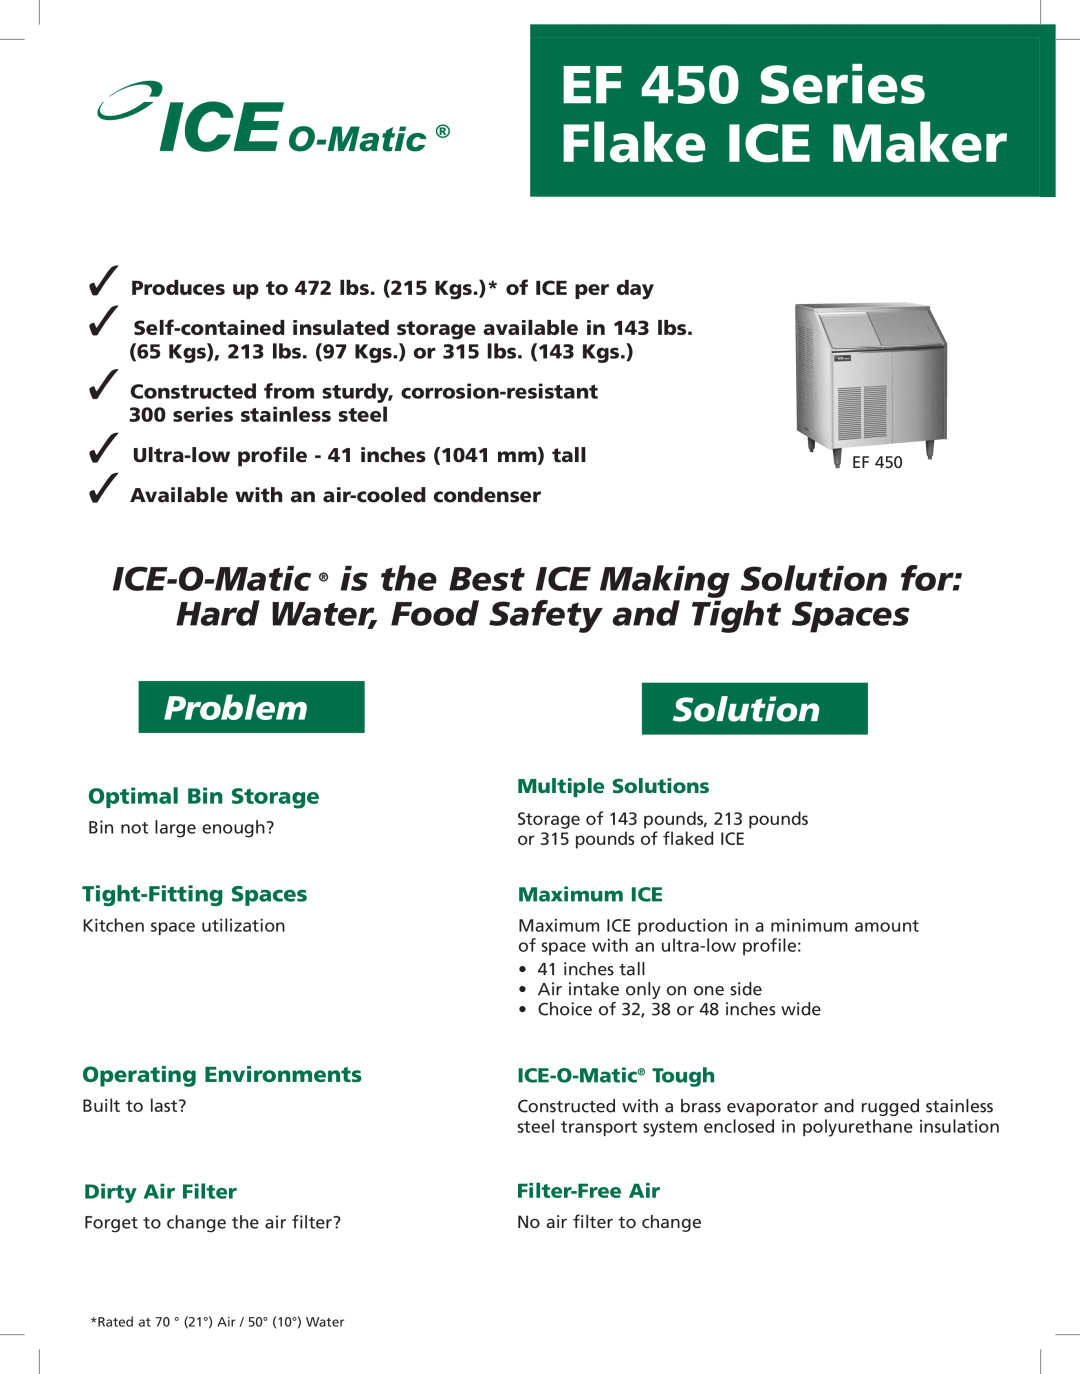 Ice-O-Matic manual EF 450 Series Flake ICE Maker, Problem, Solution, Optimal Bin Storage, Tight-FittingSpaces 